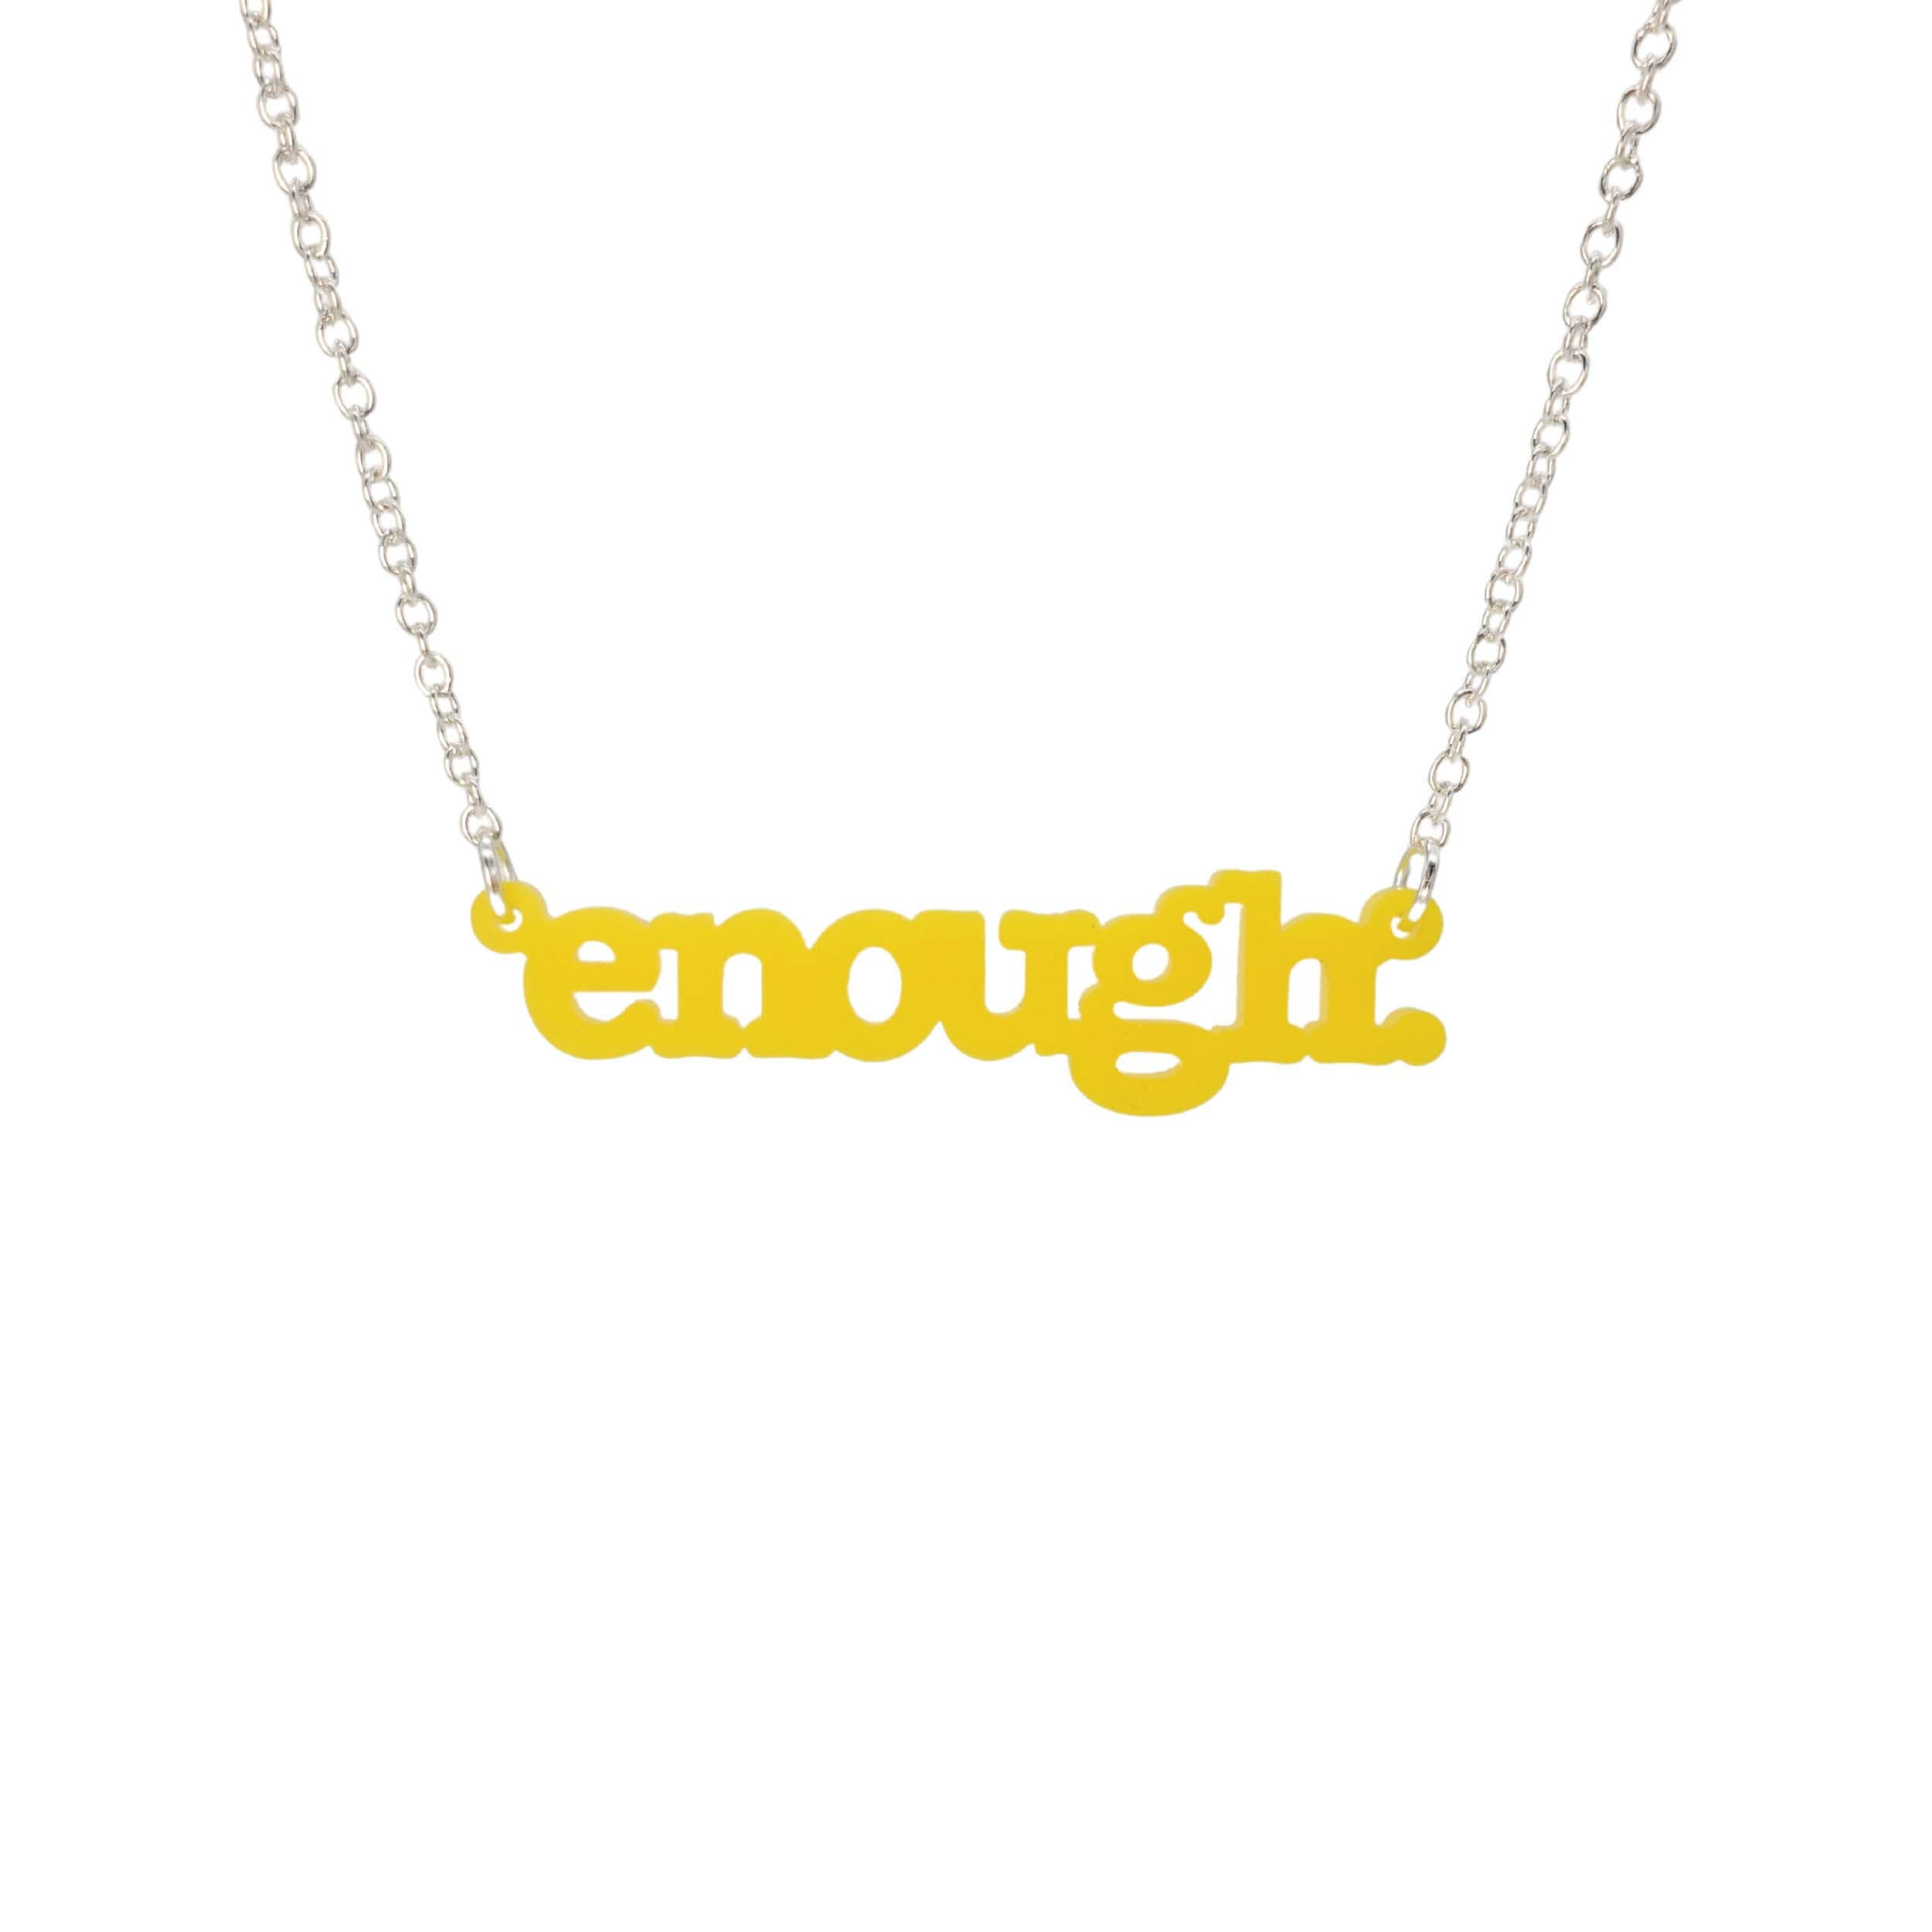 Matte lemon Enough necklace shown hanging on a silver chain against a white background. 